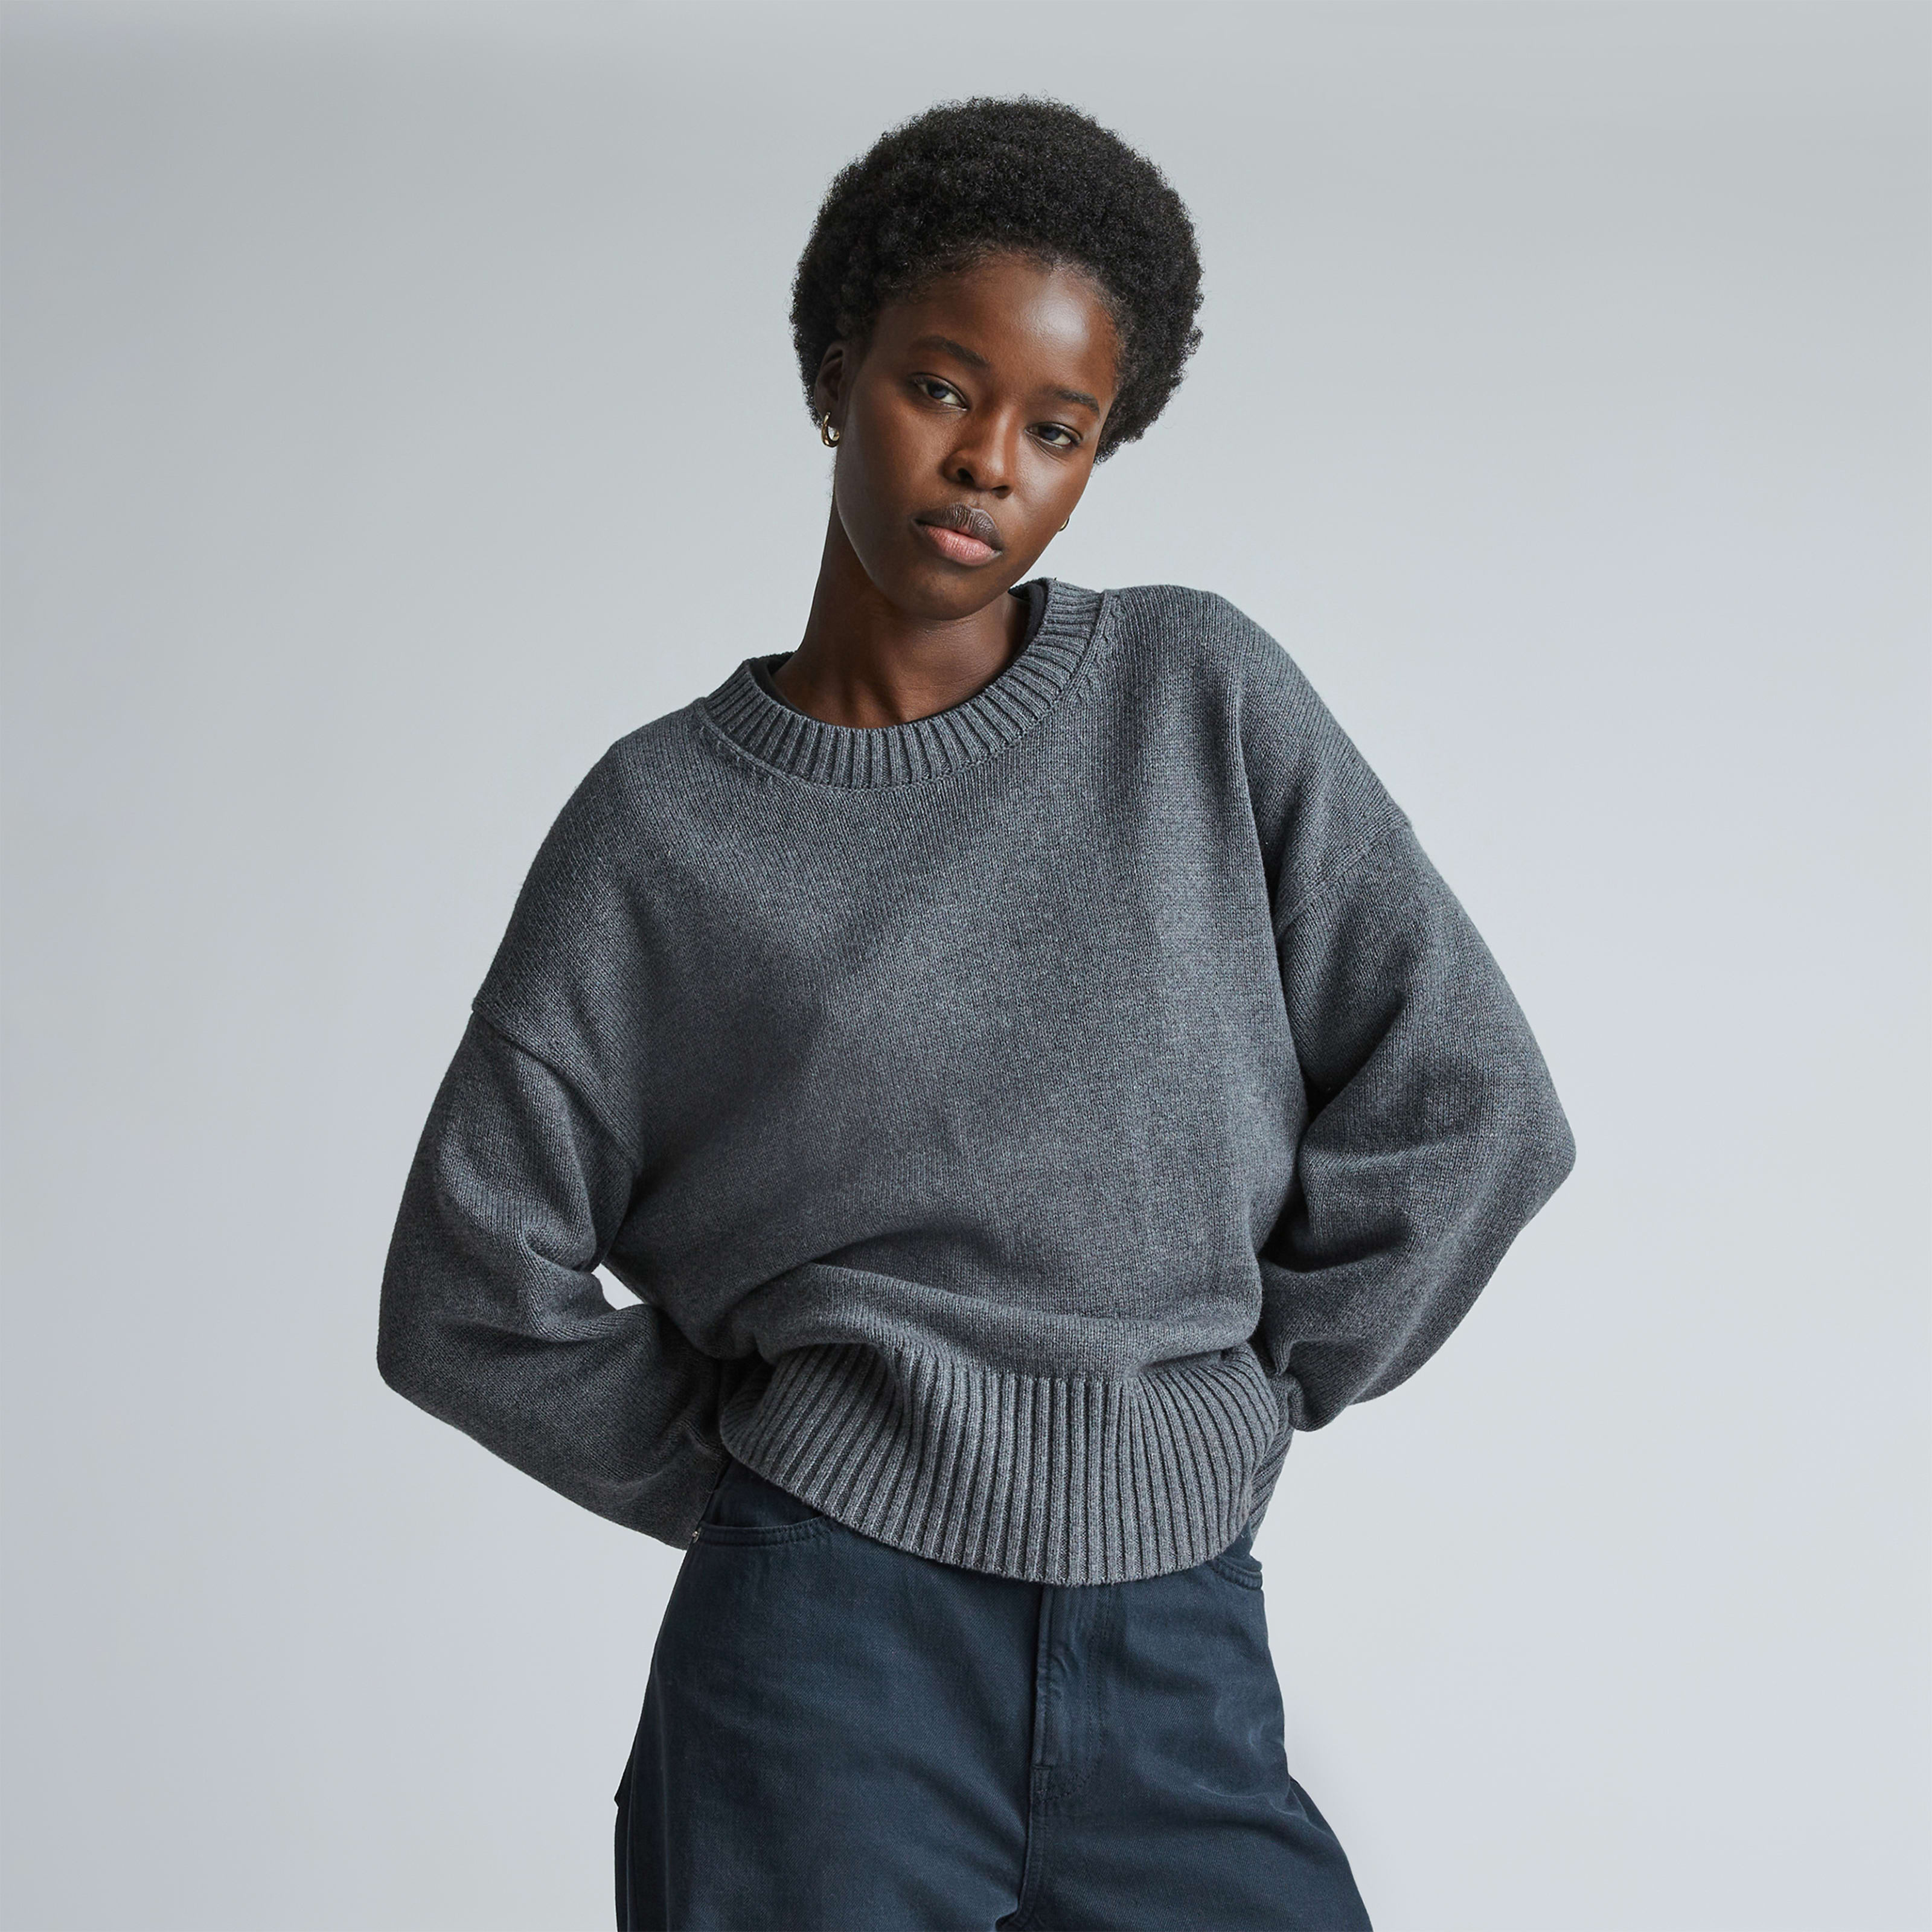 women's organic cotton crew sweater by everlane in heathered charcoal, size xxs